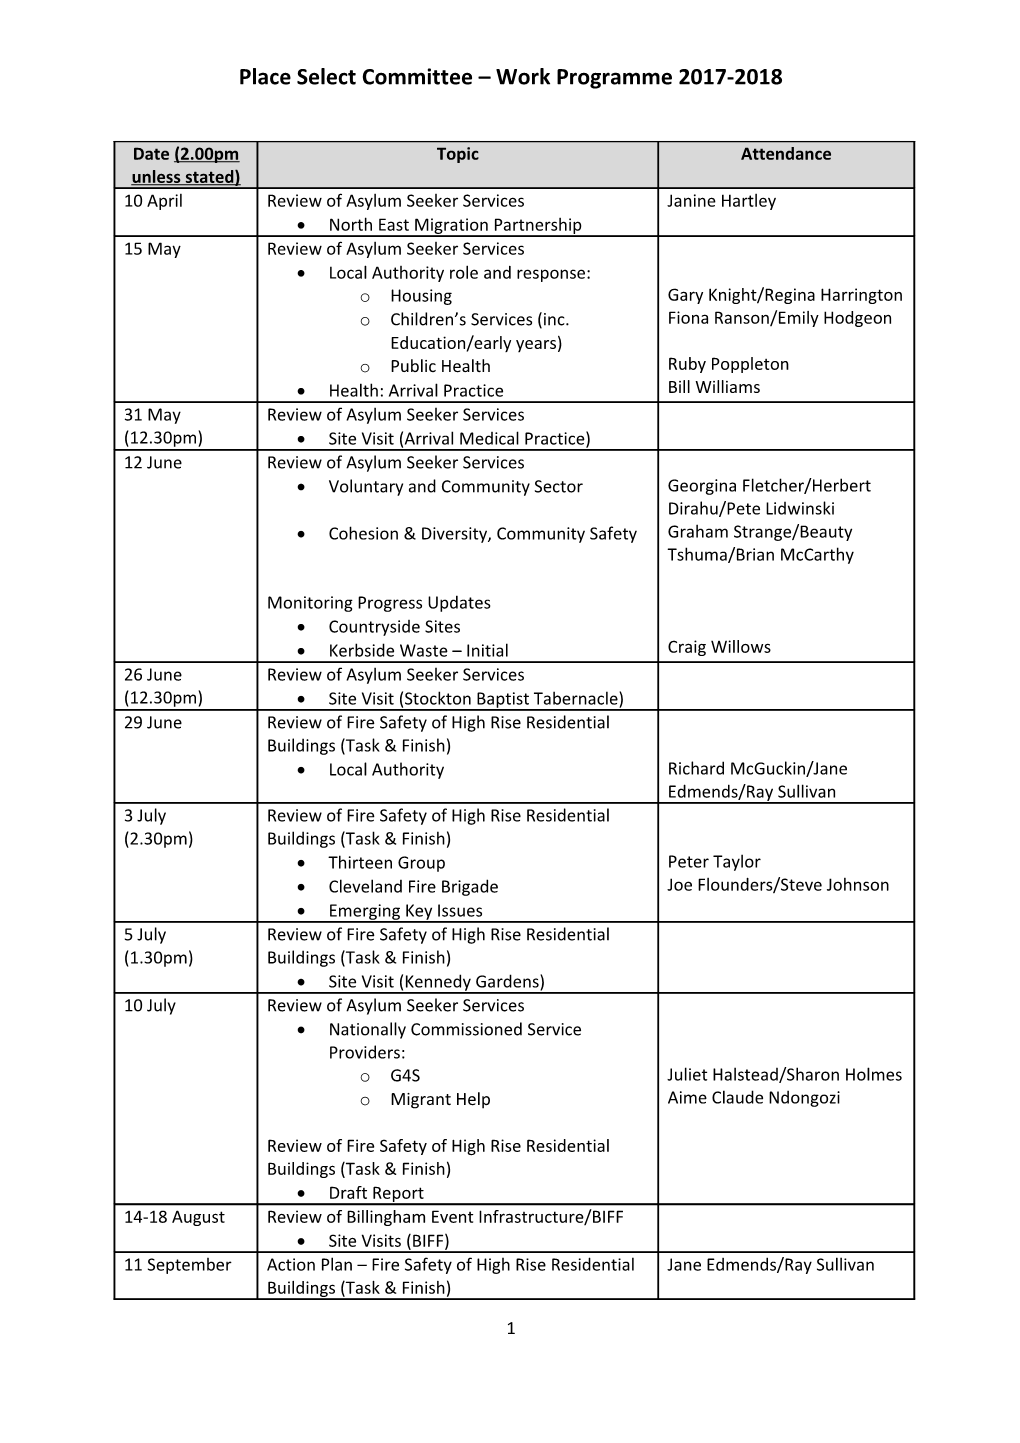 Place Select Committee Work Programme 2017-2018